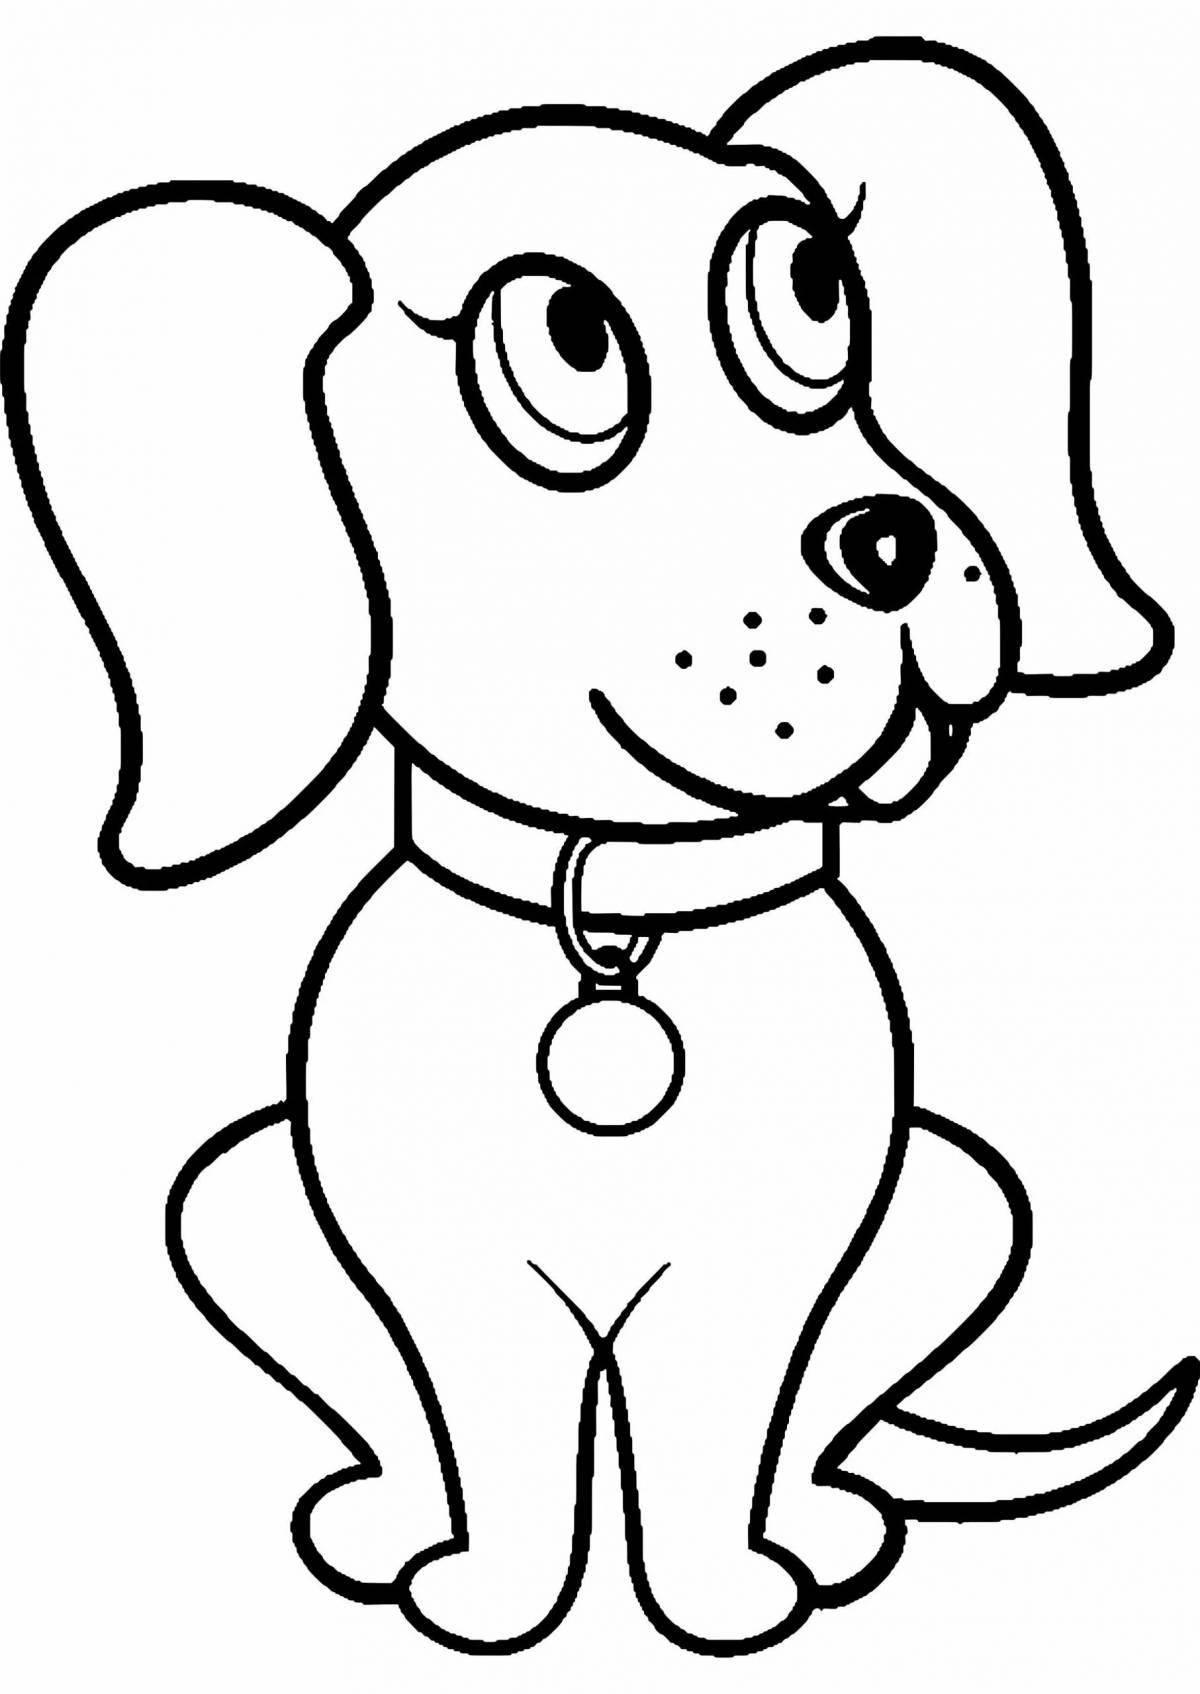 Ecstatic light dog coloring page